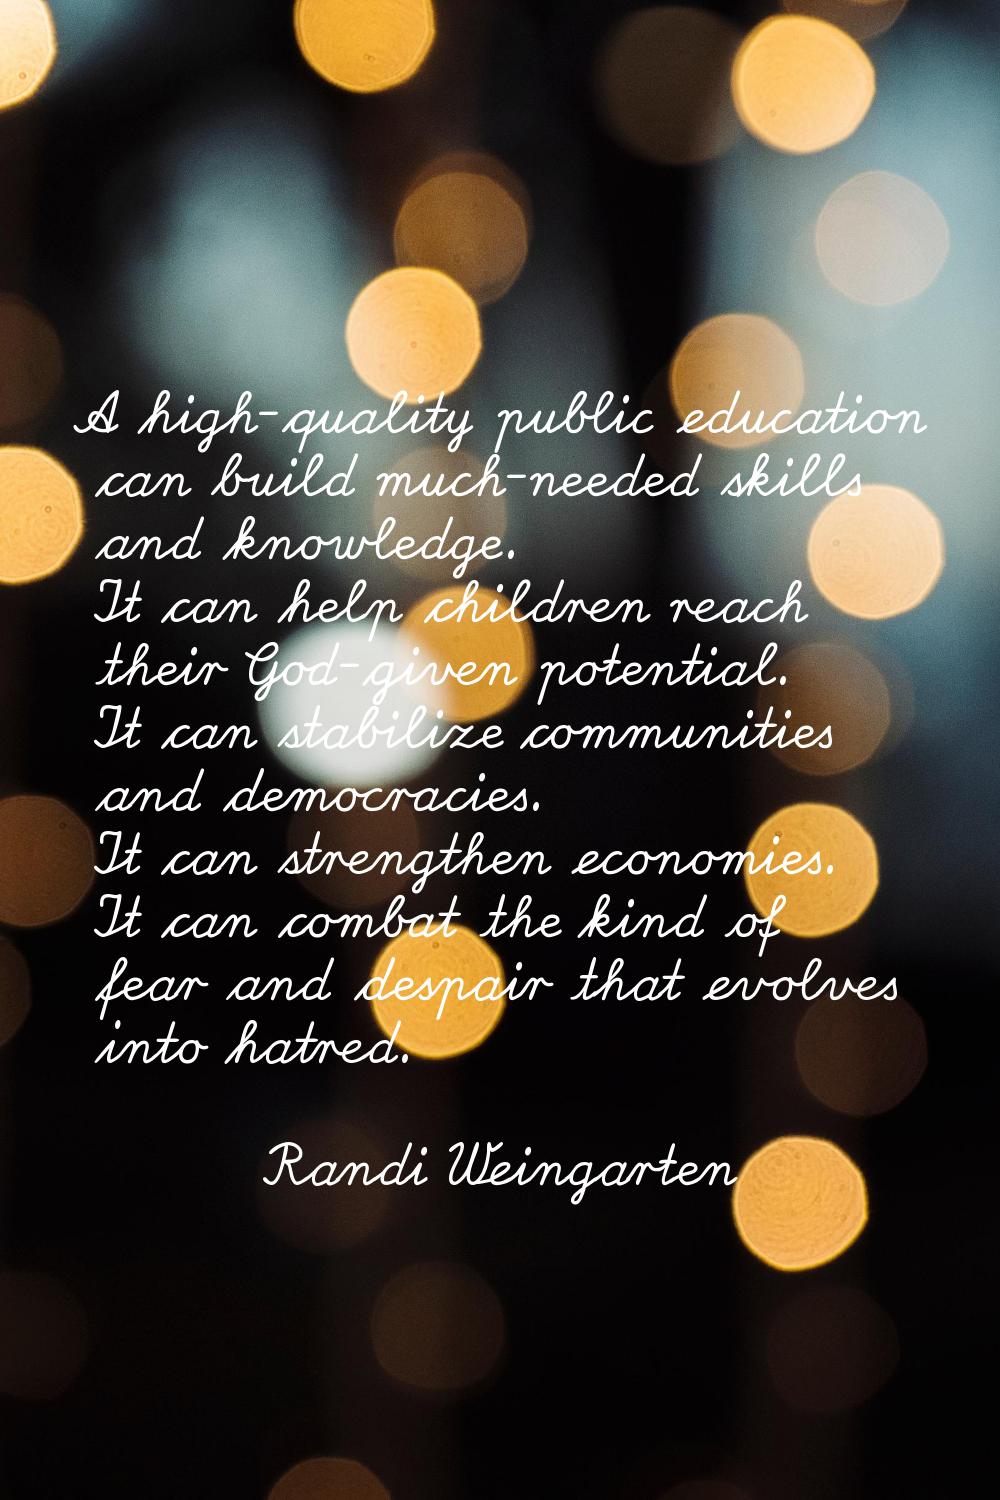 A high-quality public education can build much-needed skills and knowledge. It can help children re